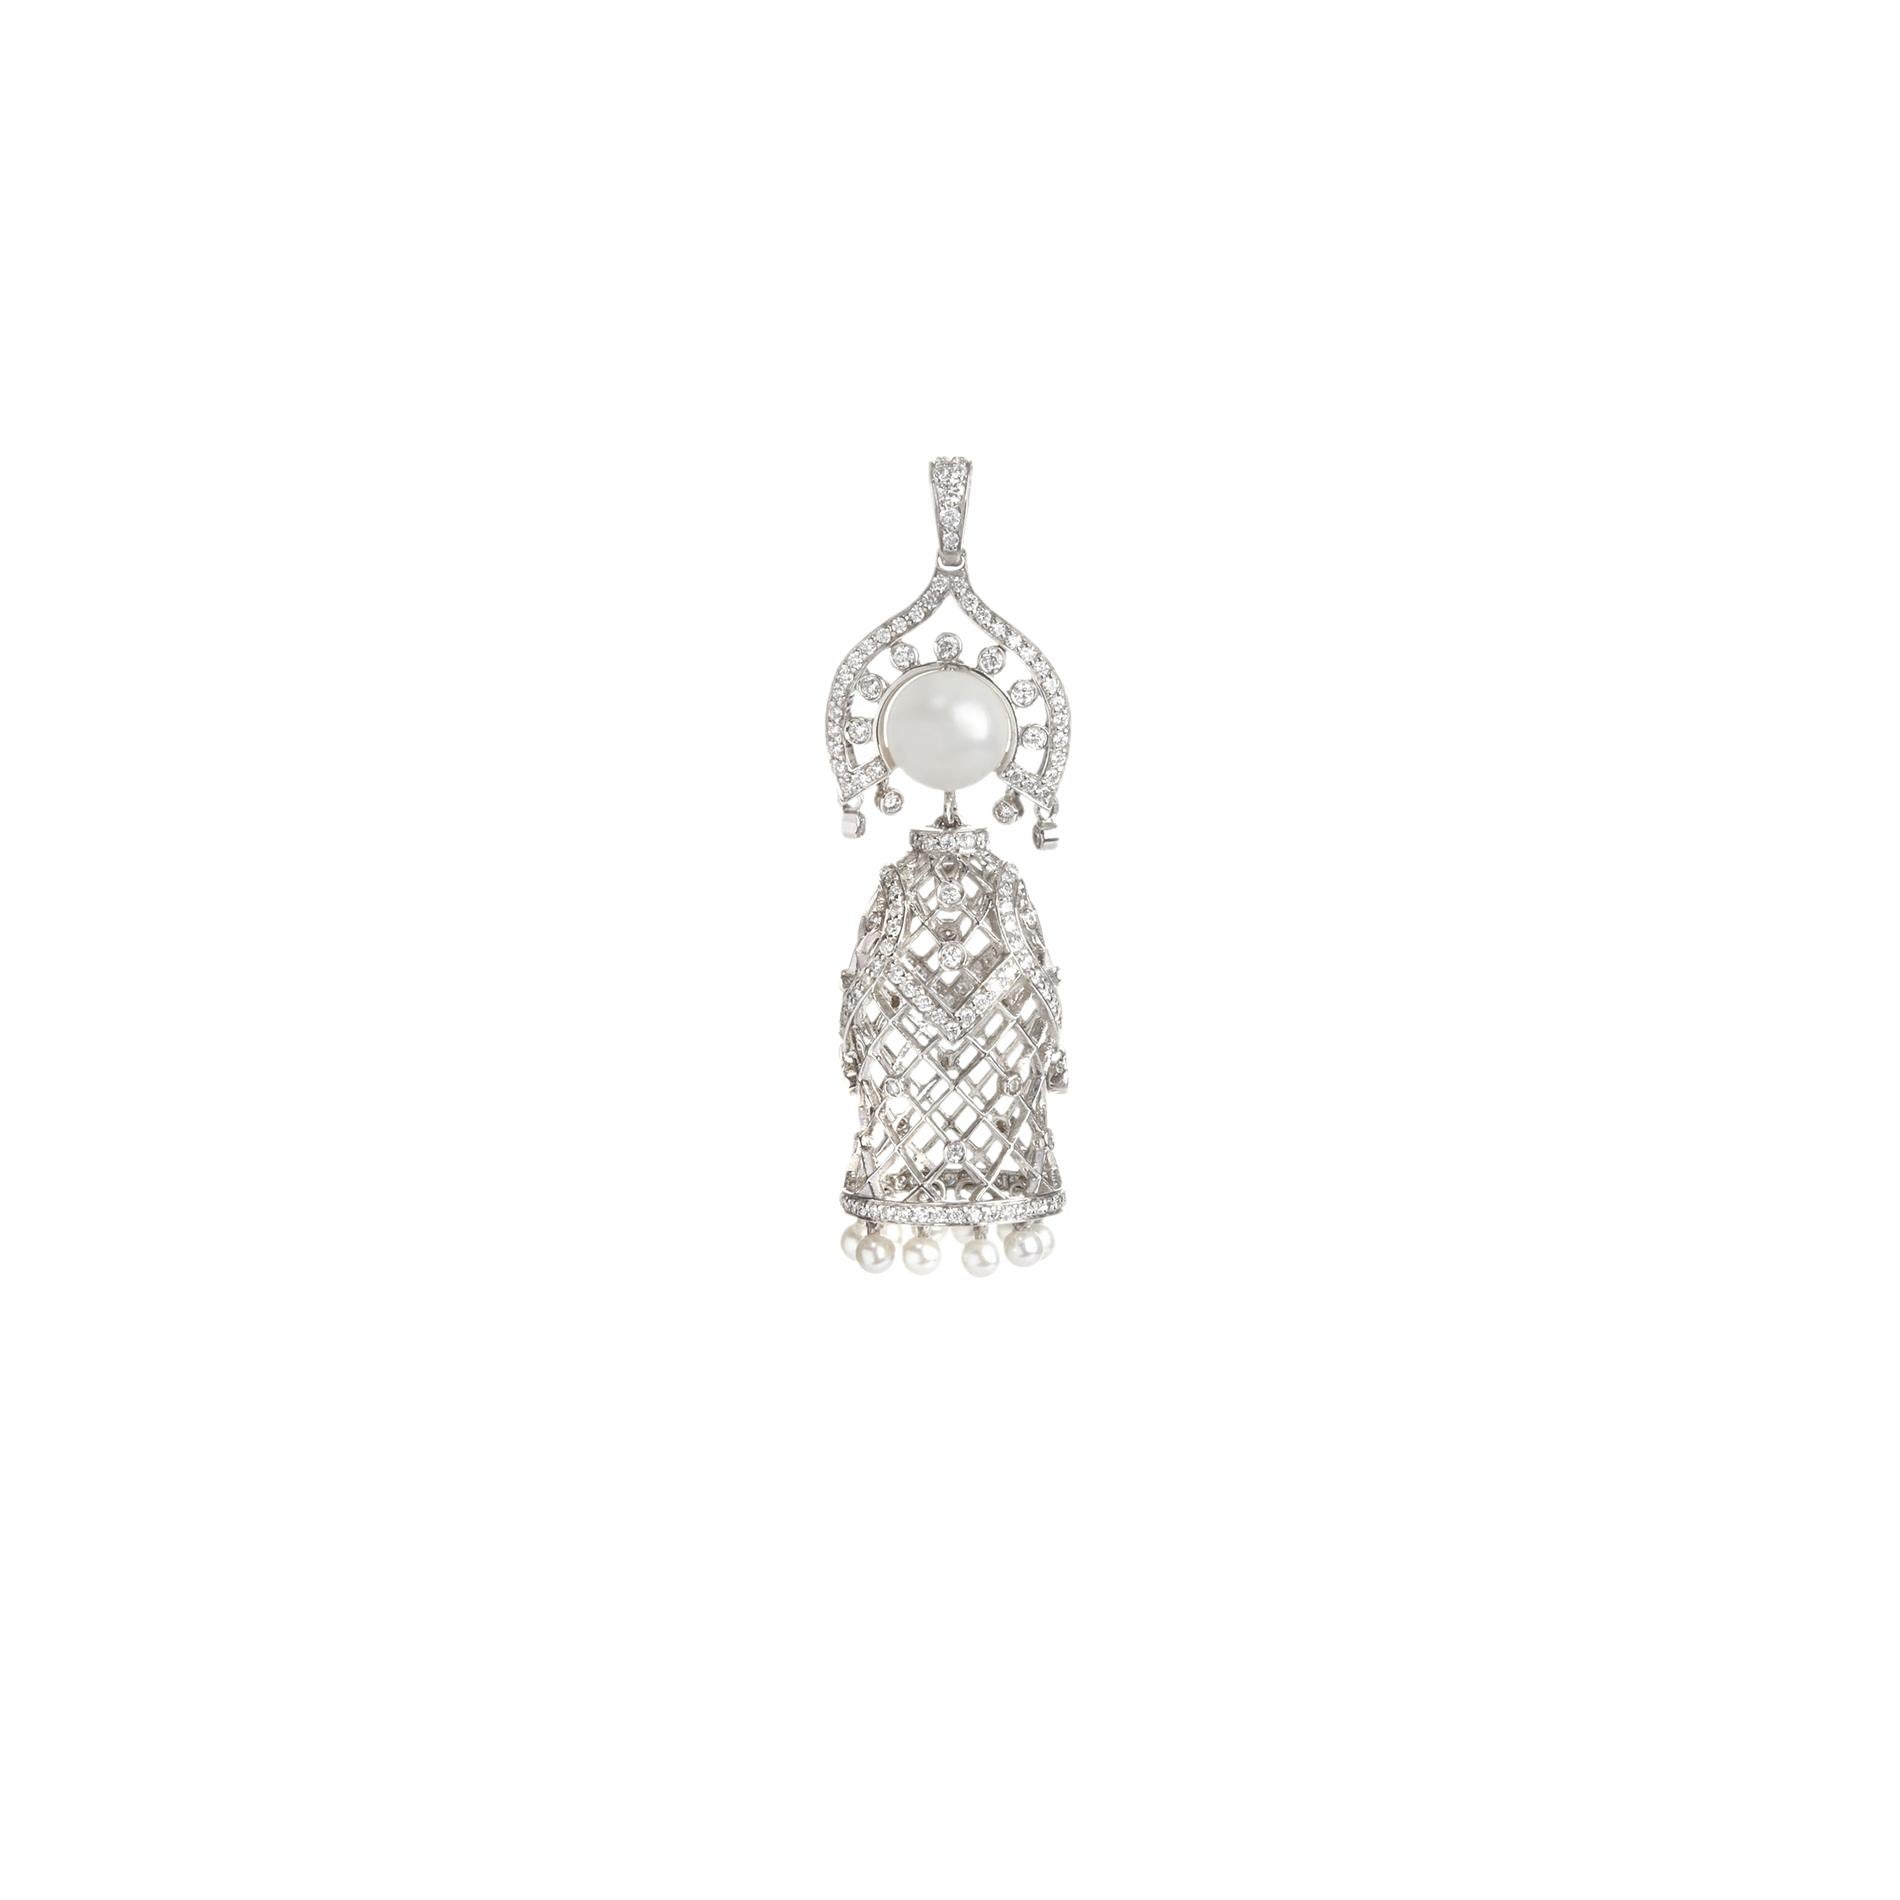 Inspired by Serge Diaghilev’s Ballet Russes—perhaps one of the most influential ballet companies of all time—this Dancing Doll pendant is Sybarite’s tribute to its enduring legend.  

Centred around a singular, flawless pearl, taking years to